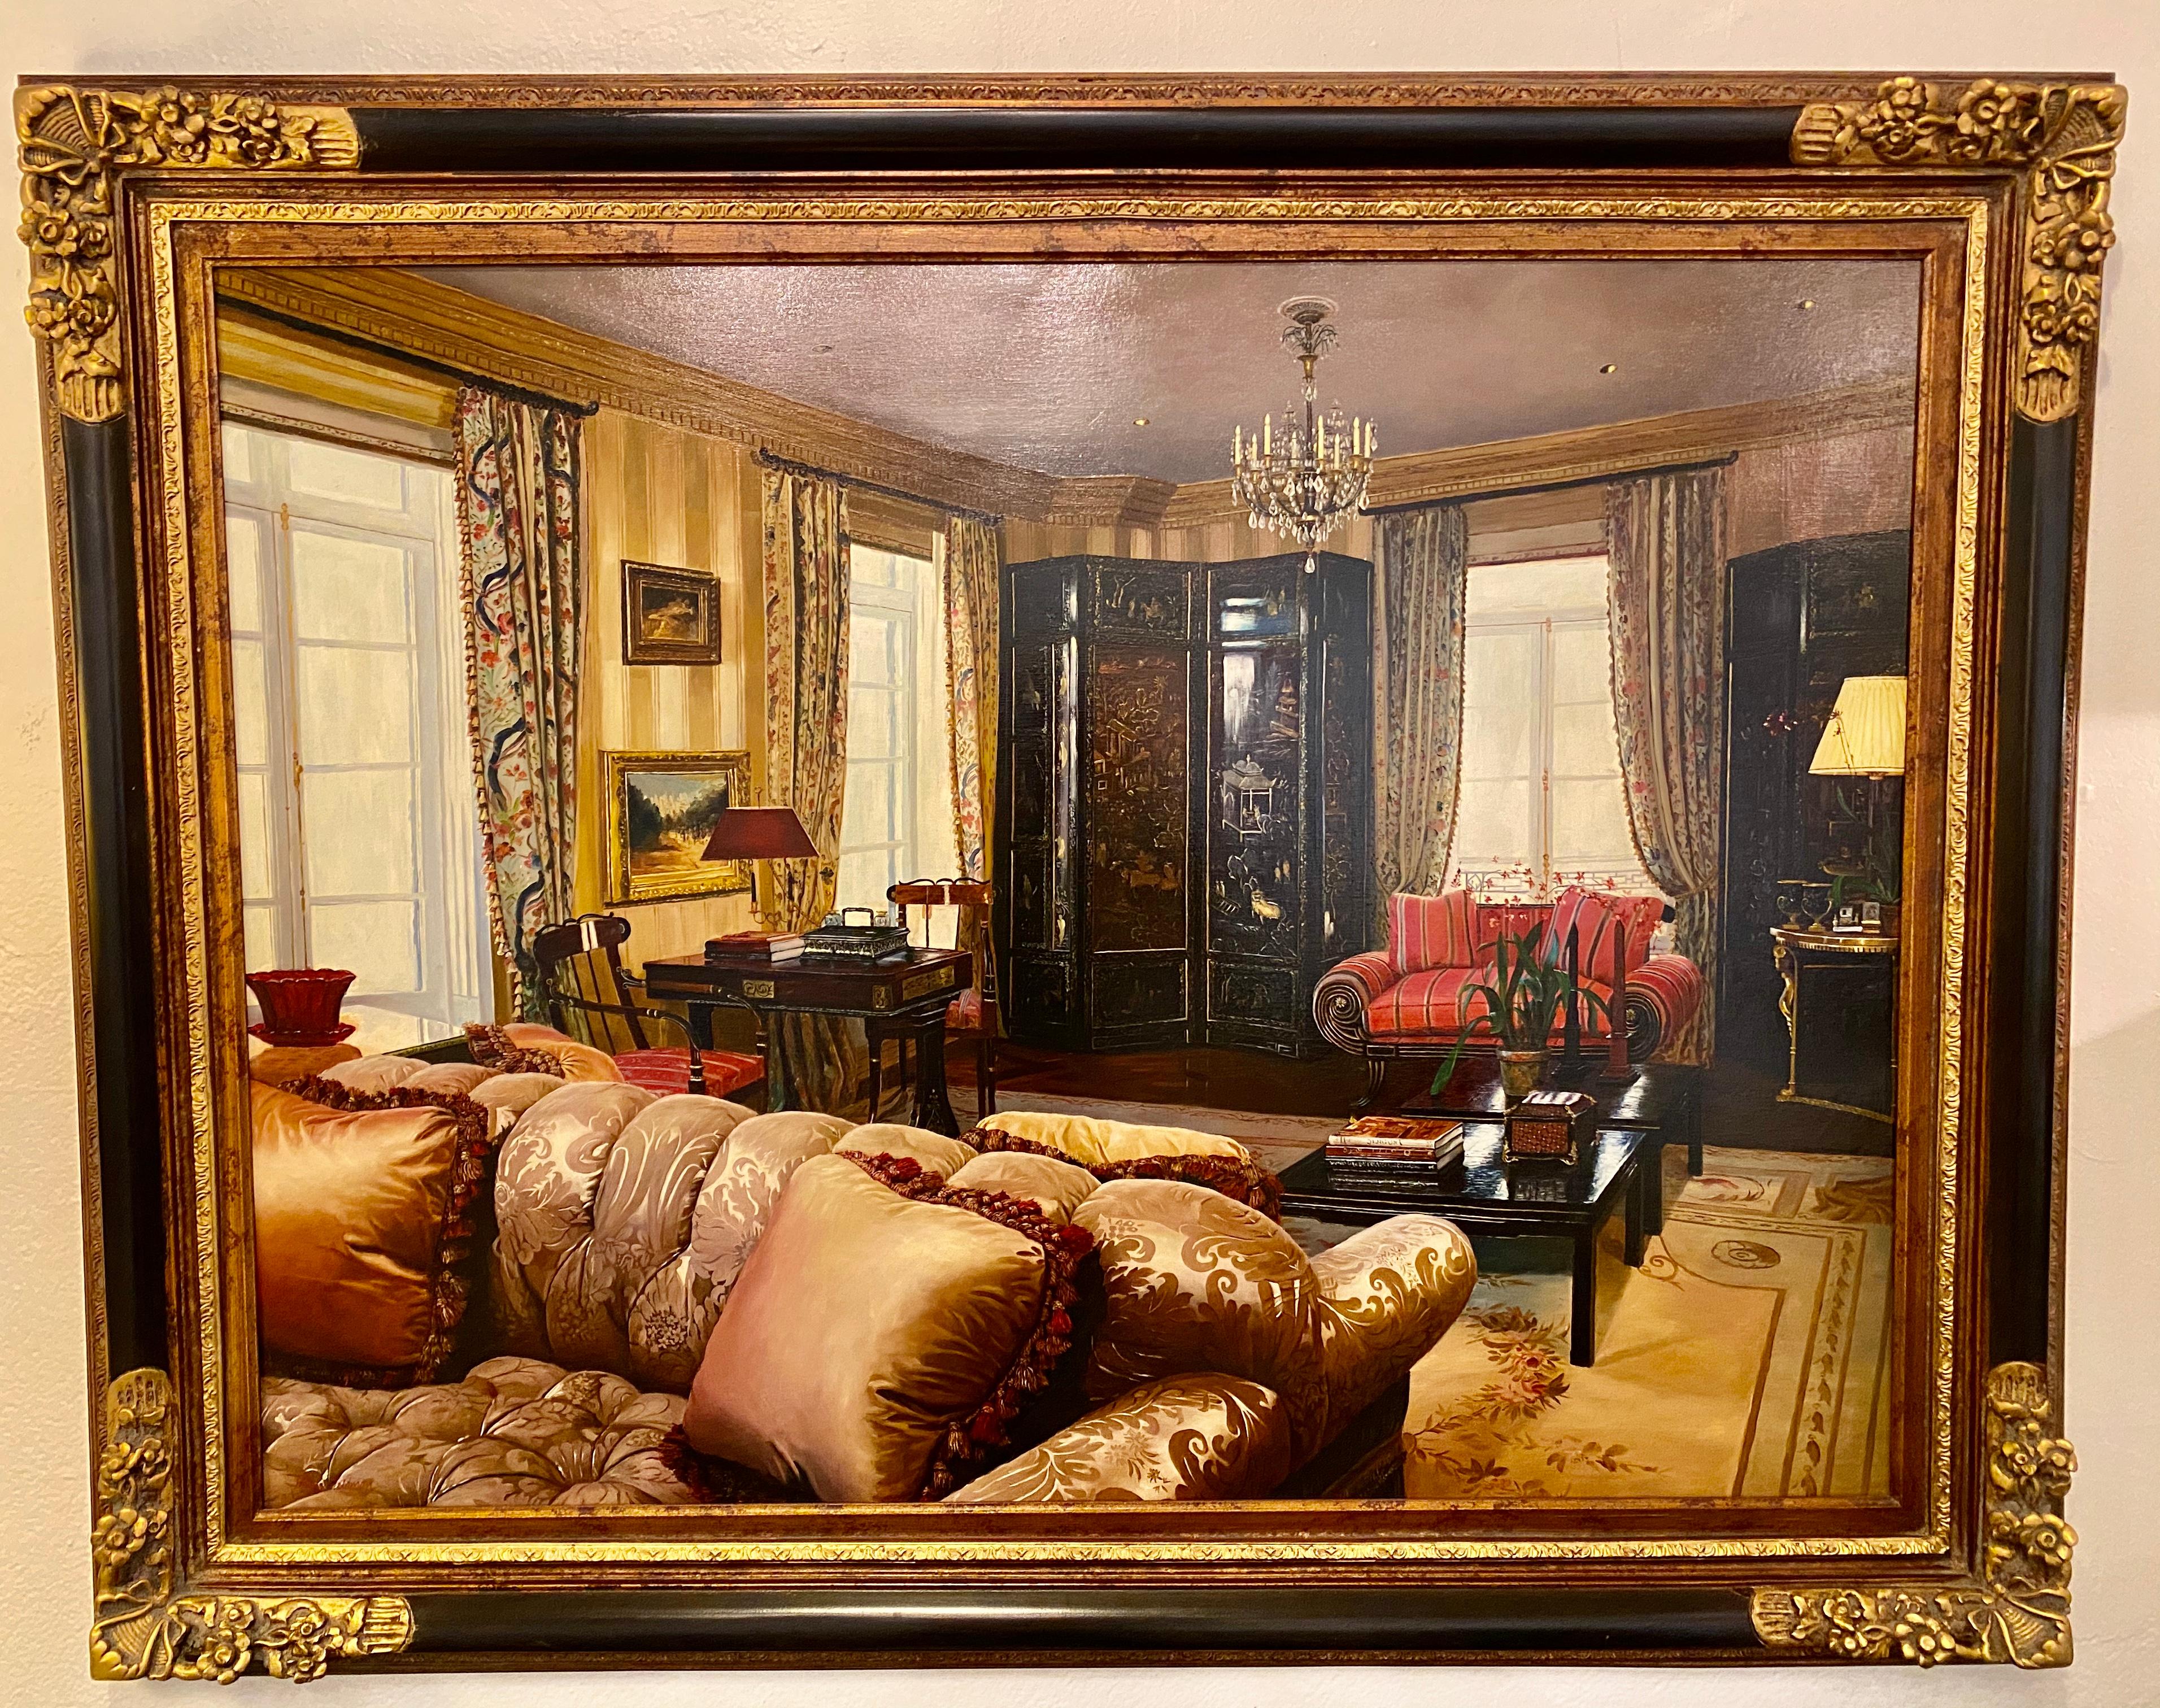 Oil on canvas interior home design in a custom frame. The painting signed Feldman. This striking interior painting is certain to add style and glamour to any room in the home. The ebony and parcel gilt designed frame flanking a finely done oil